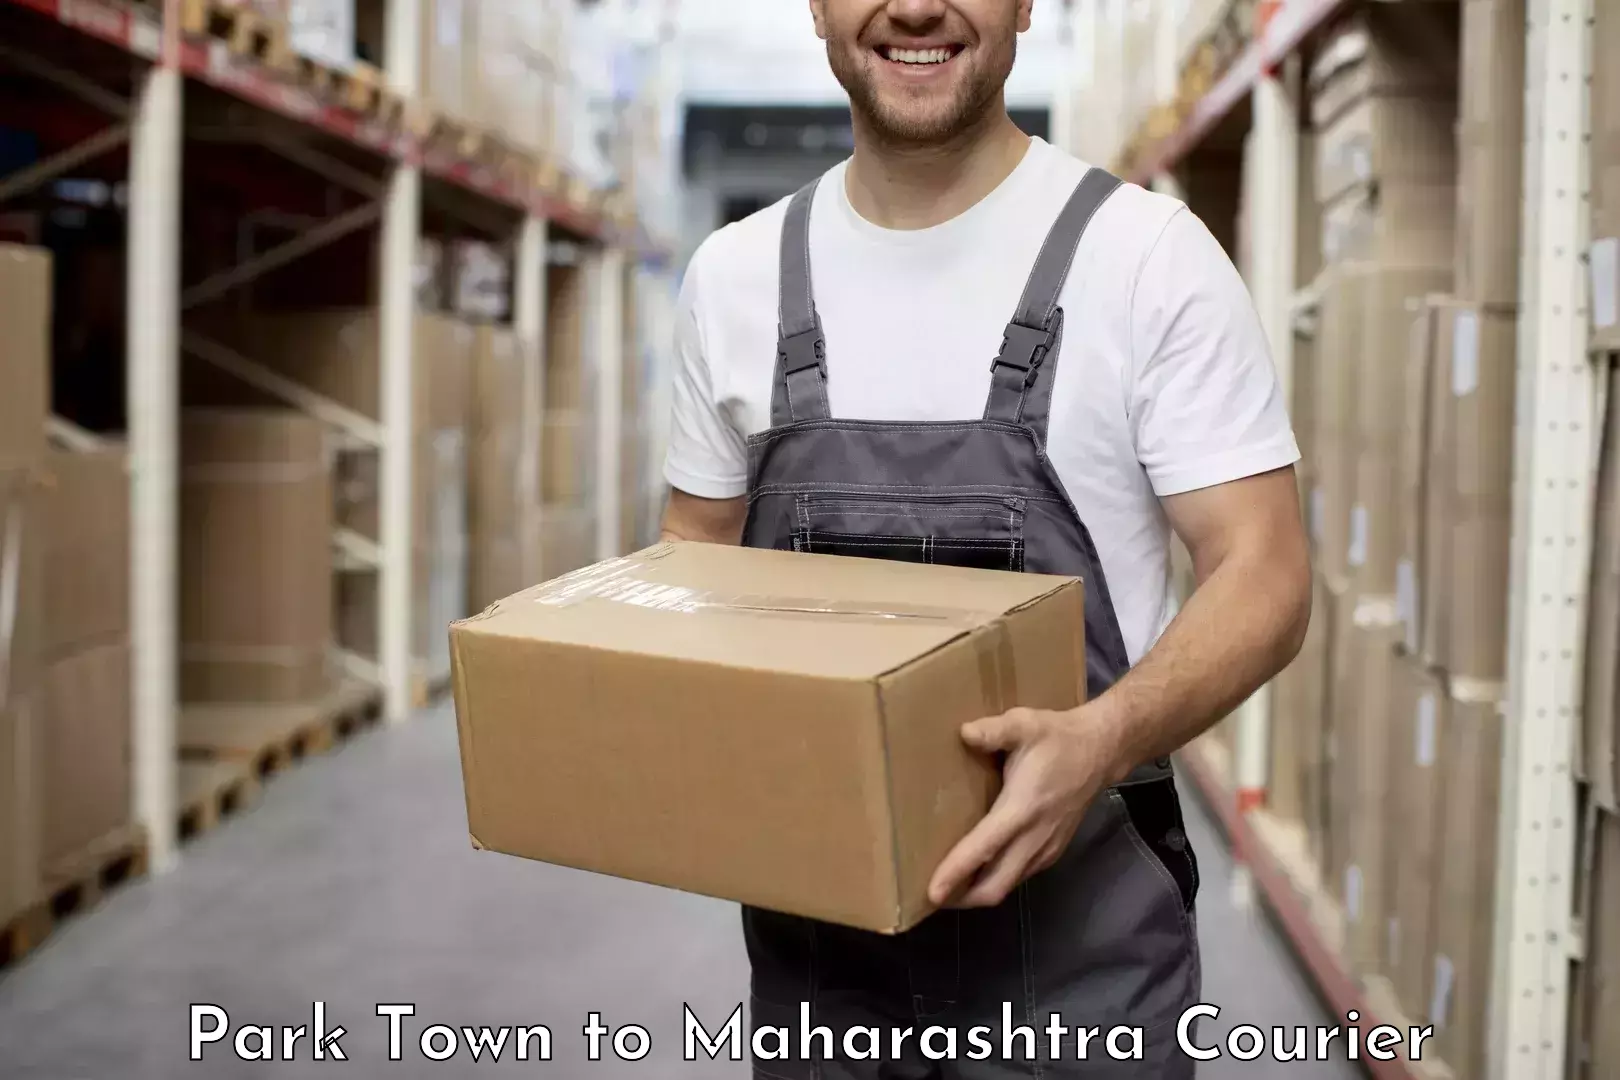 Express package services Park Town to Maharashtra